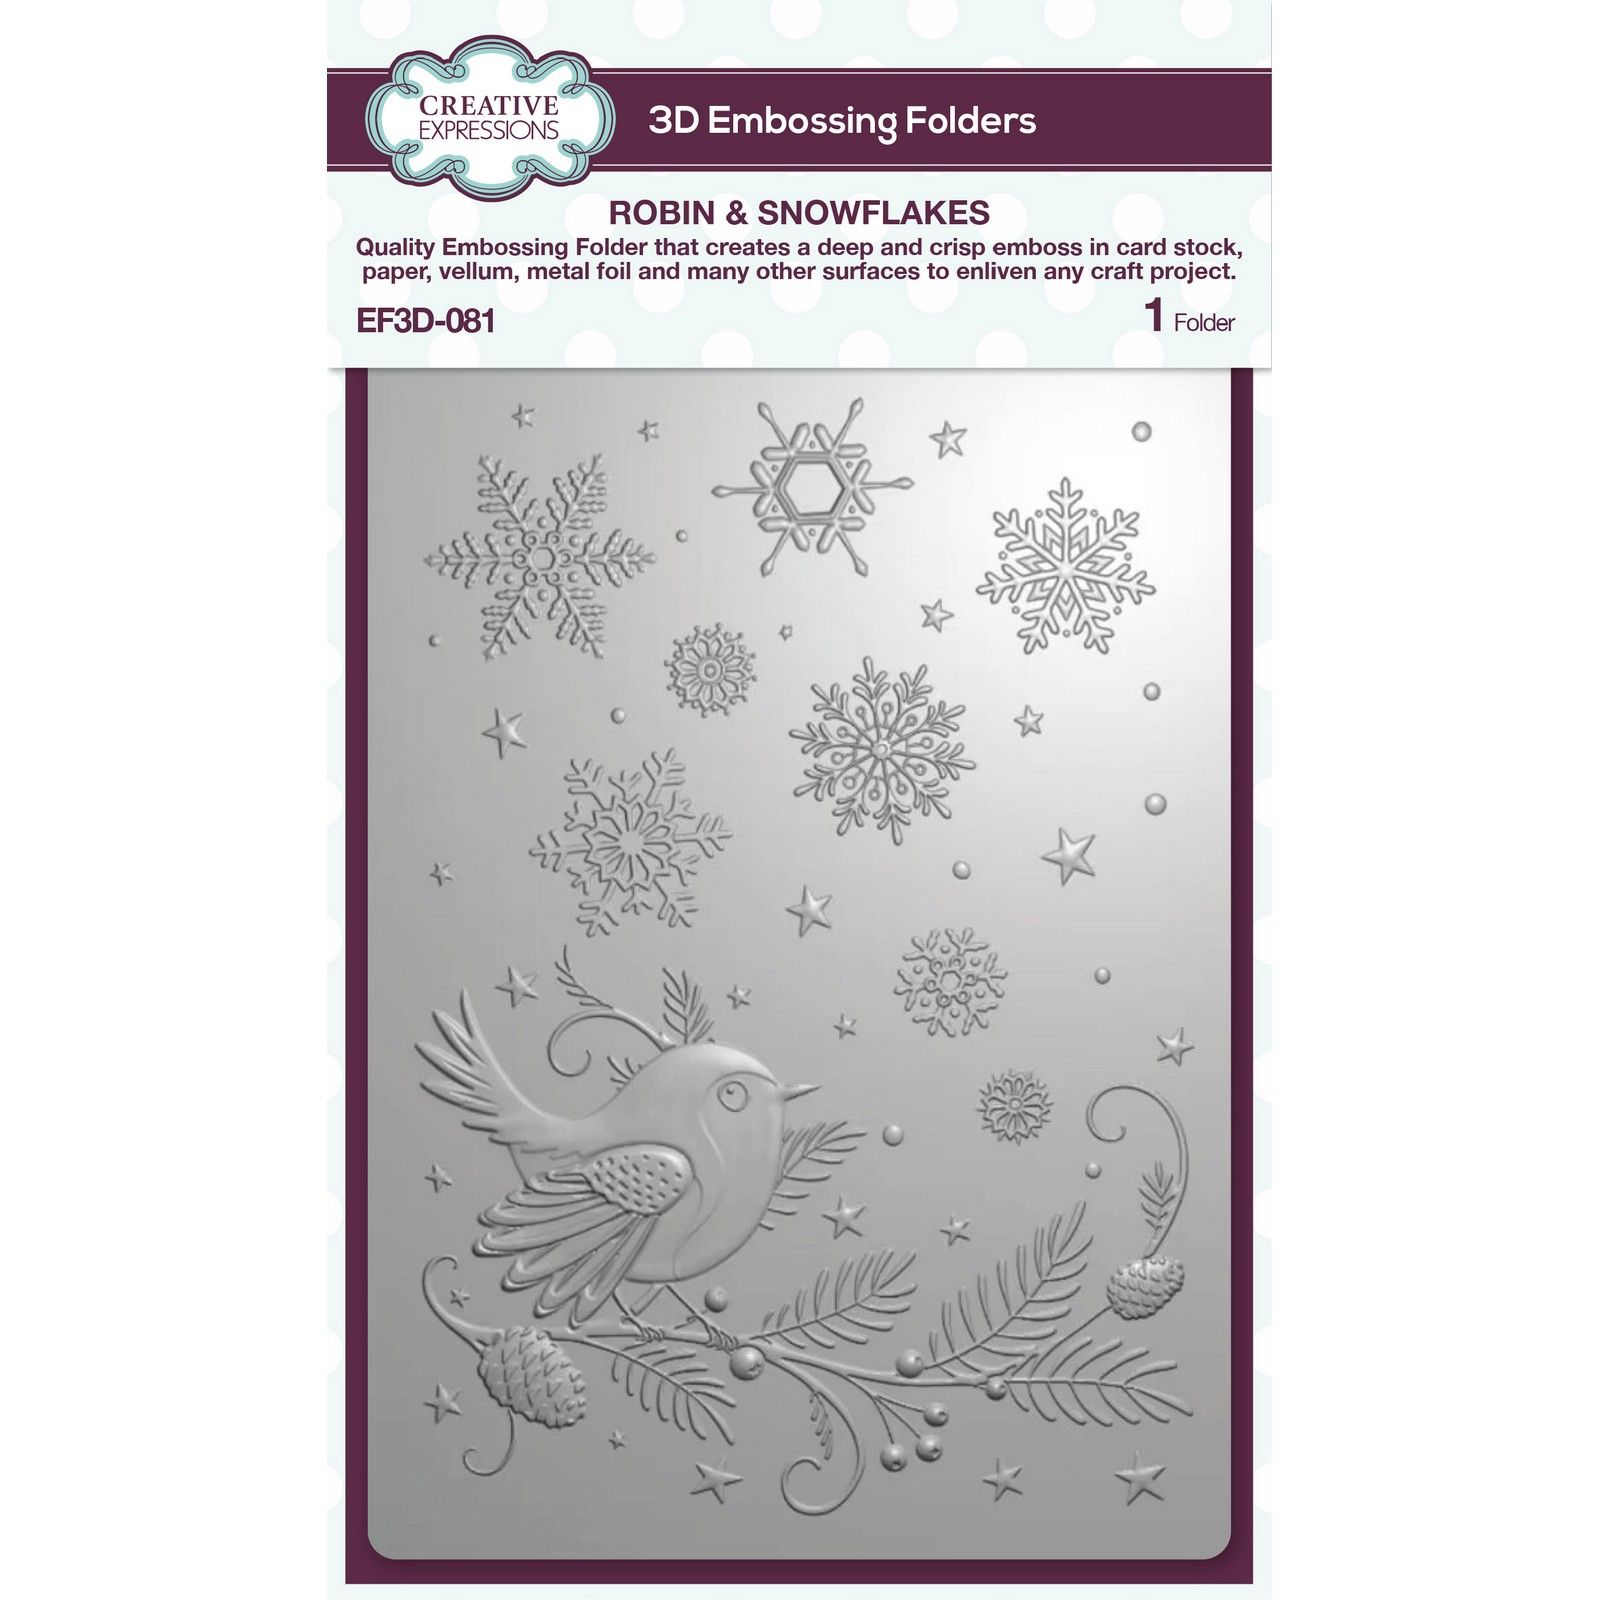 Creative Expressions • Robin & Snowflakes 5 in x 7 in 3D Embossing Folder